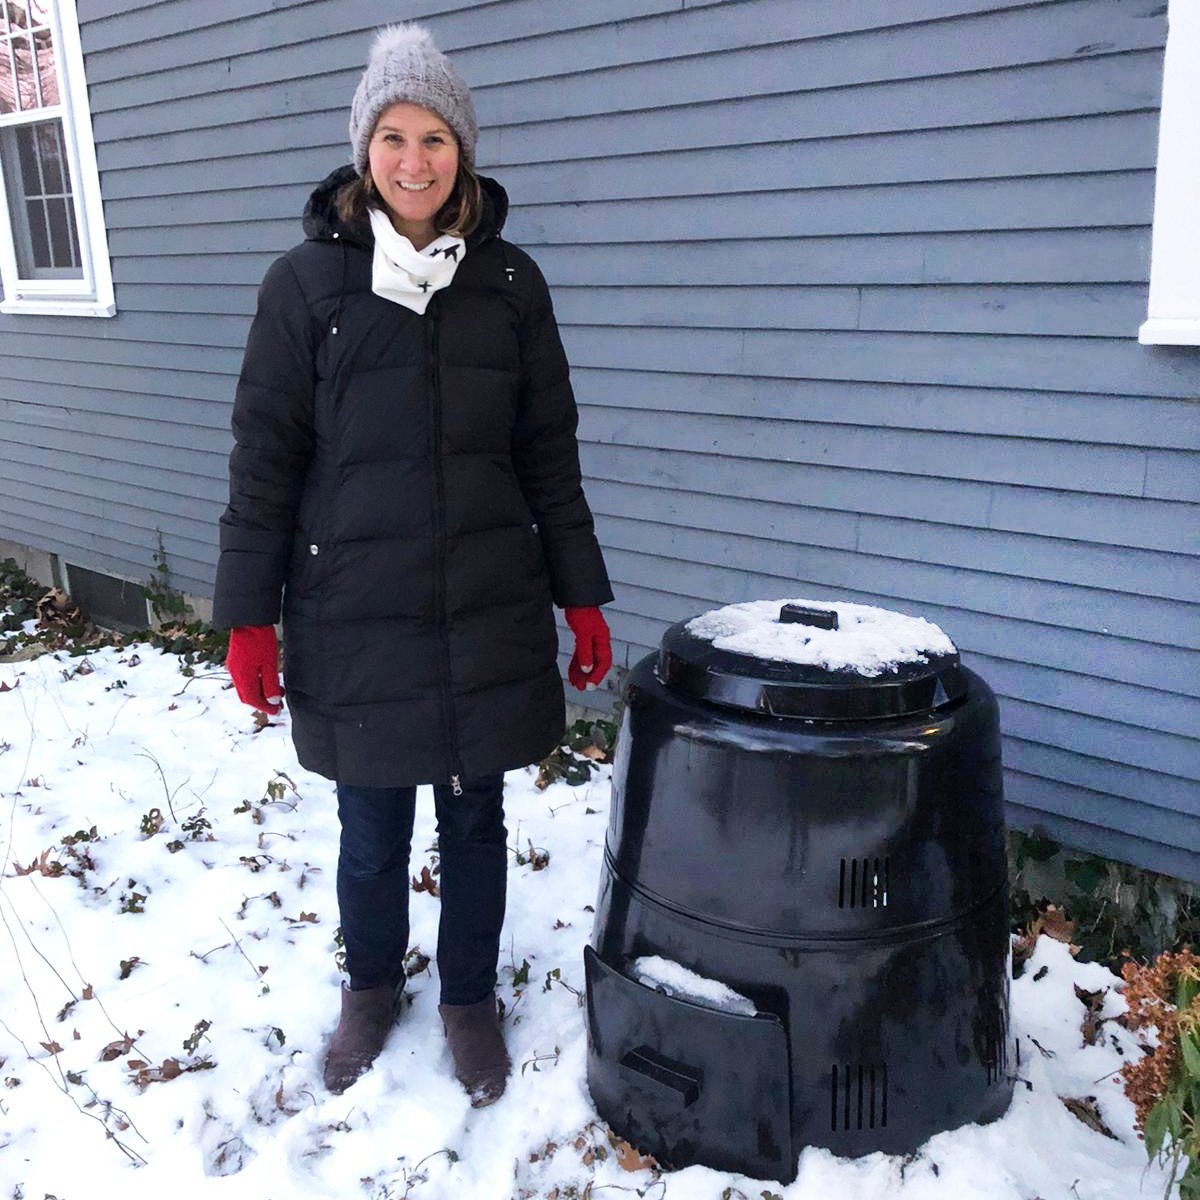 How To Compost At Home | A Compost Bin For The Neighbors